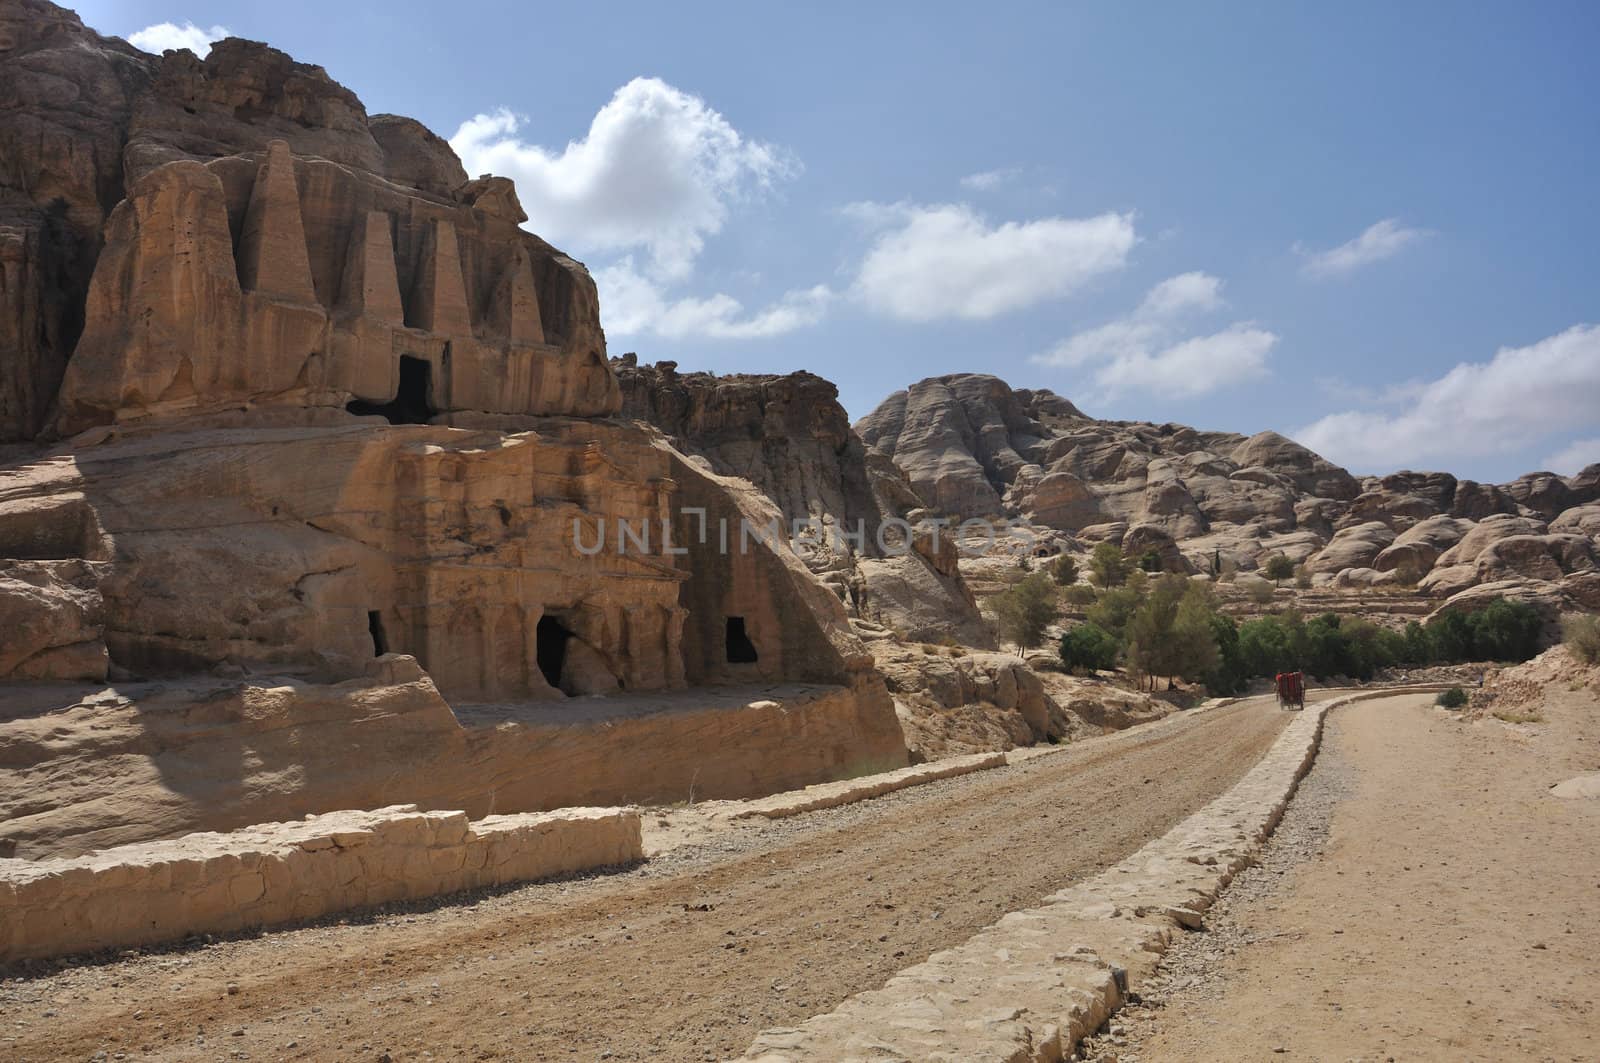 Petra is a historic and archaeological city in the Jordanian governorate of Ma'an that has rock cut architecture and water conduits system.